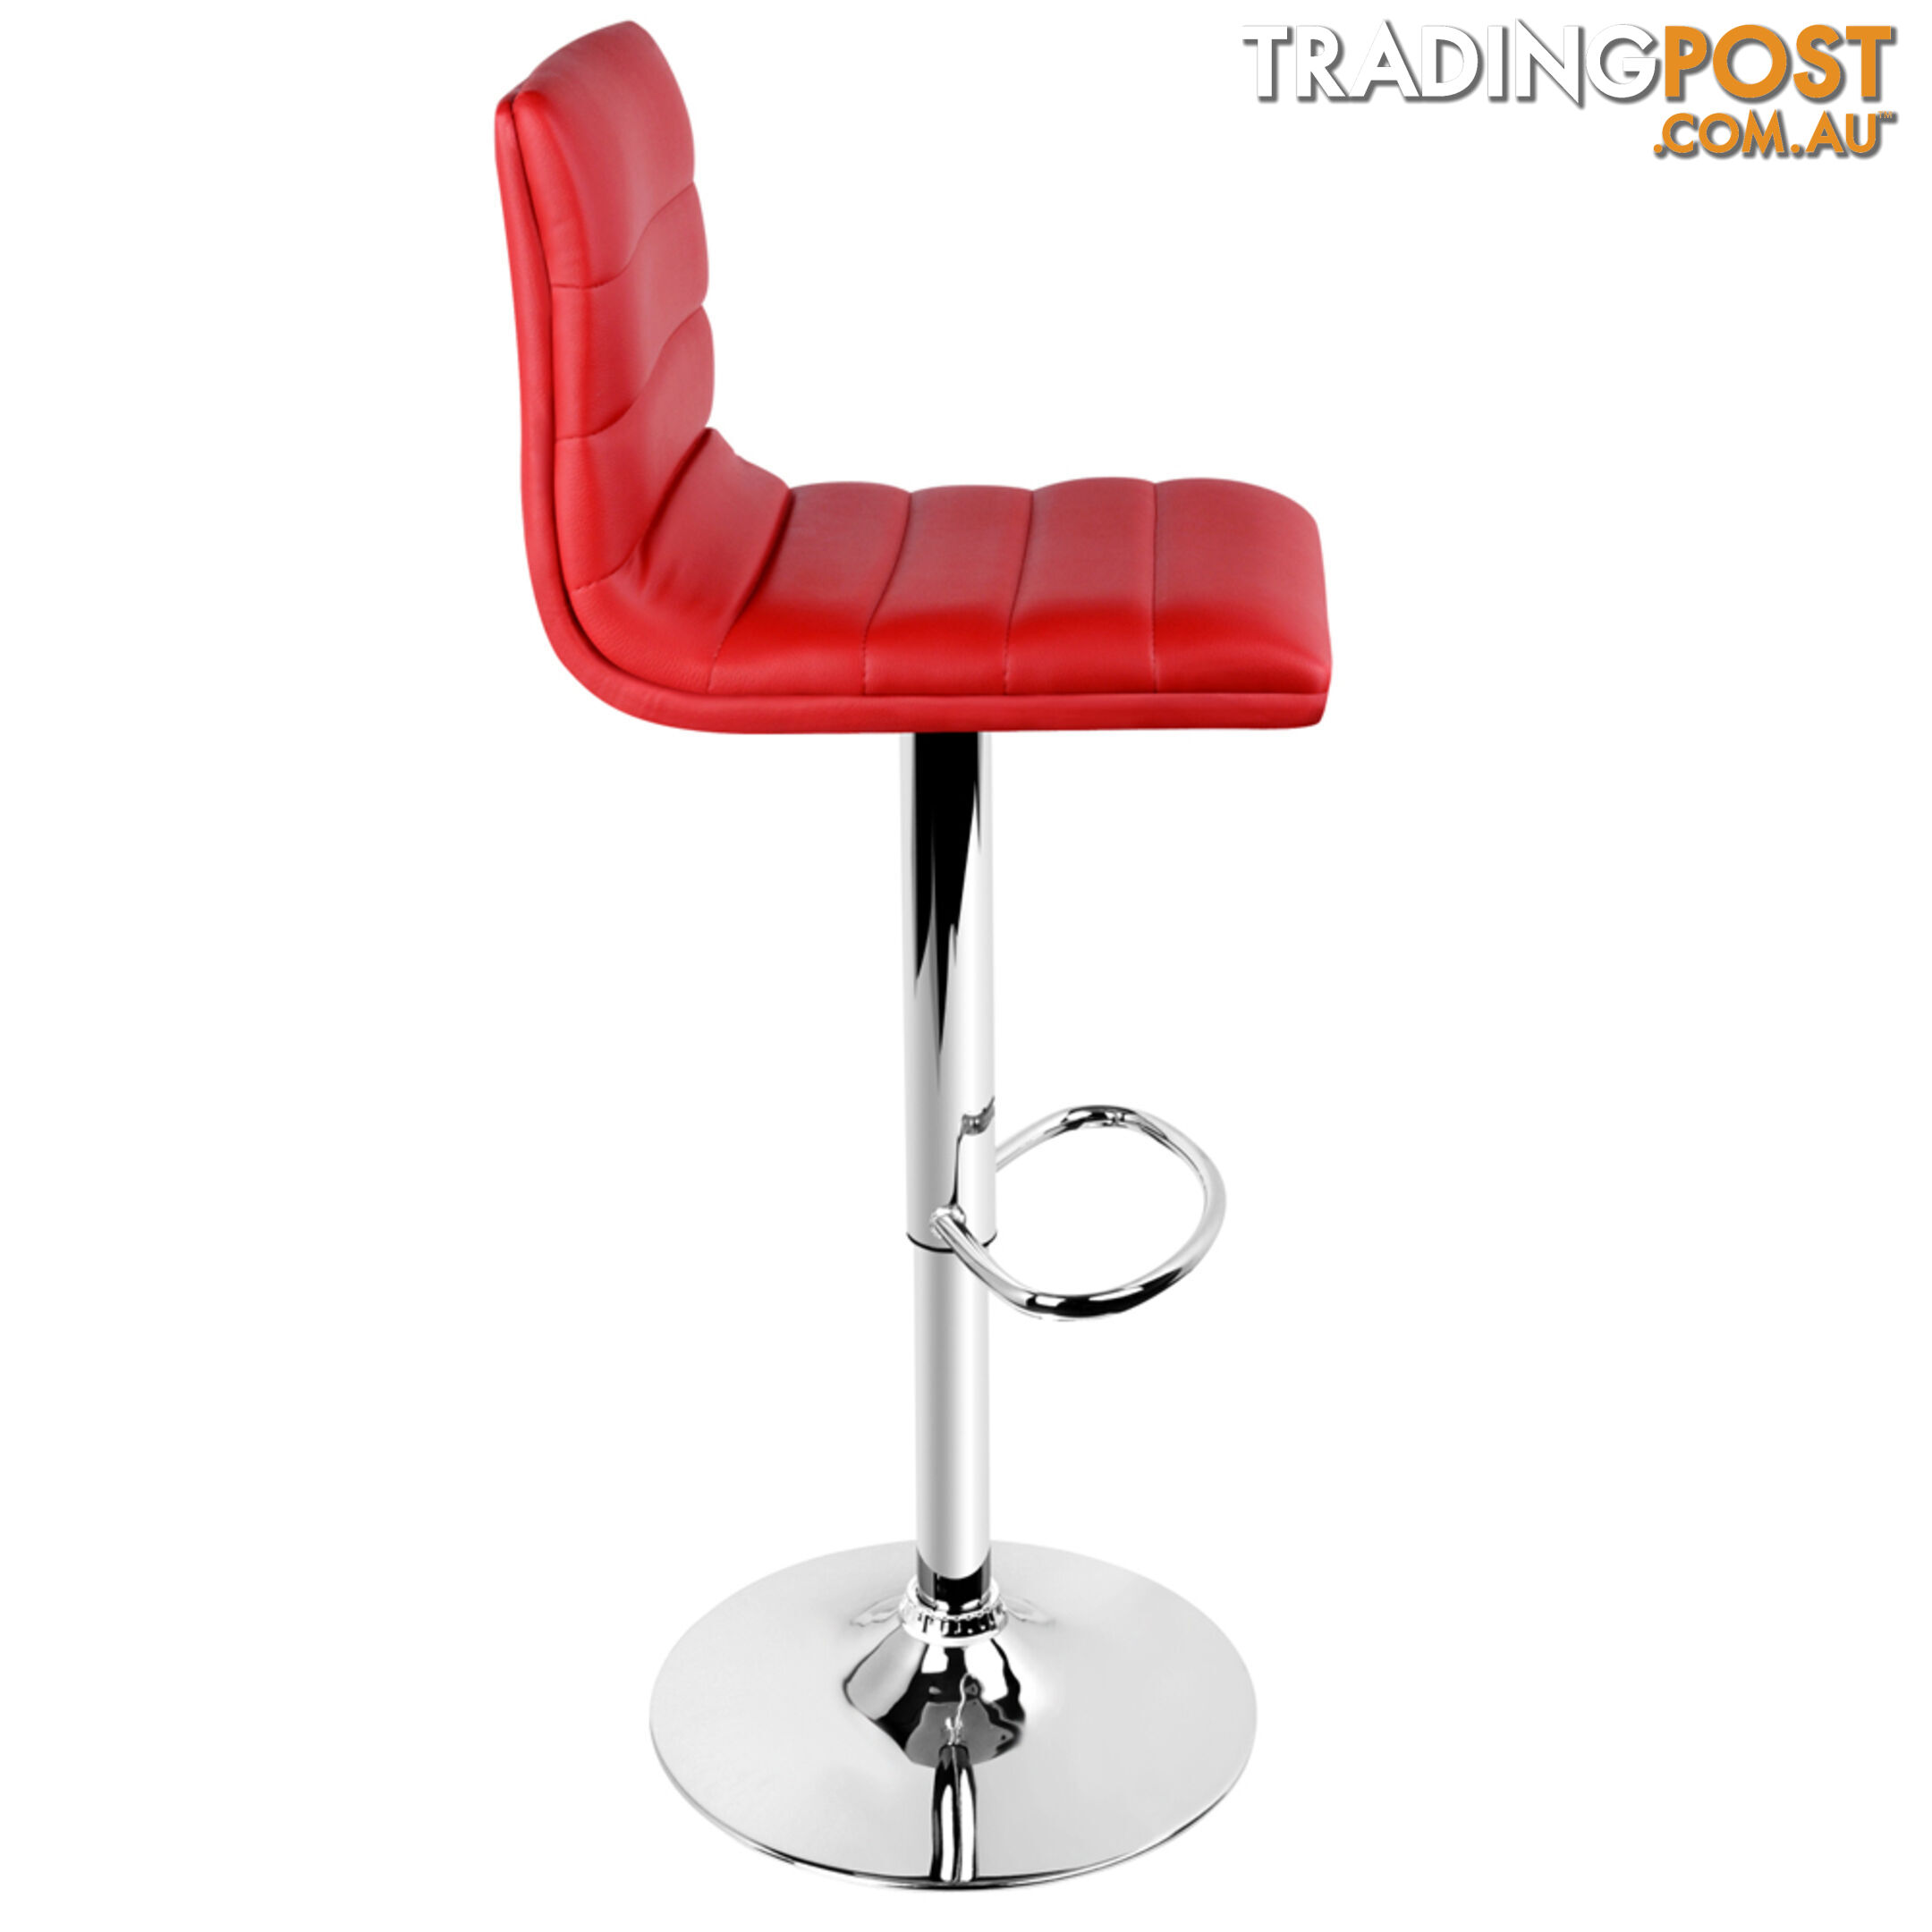 2 x PU Leather Backrest Kitchen Bar Stool Cafe Swivel Breakfast Stools Chair Red